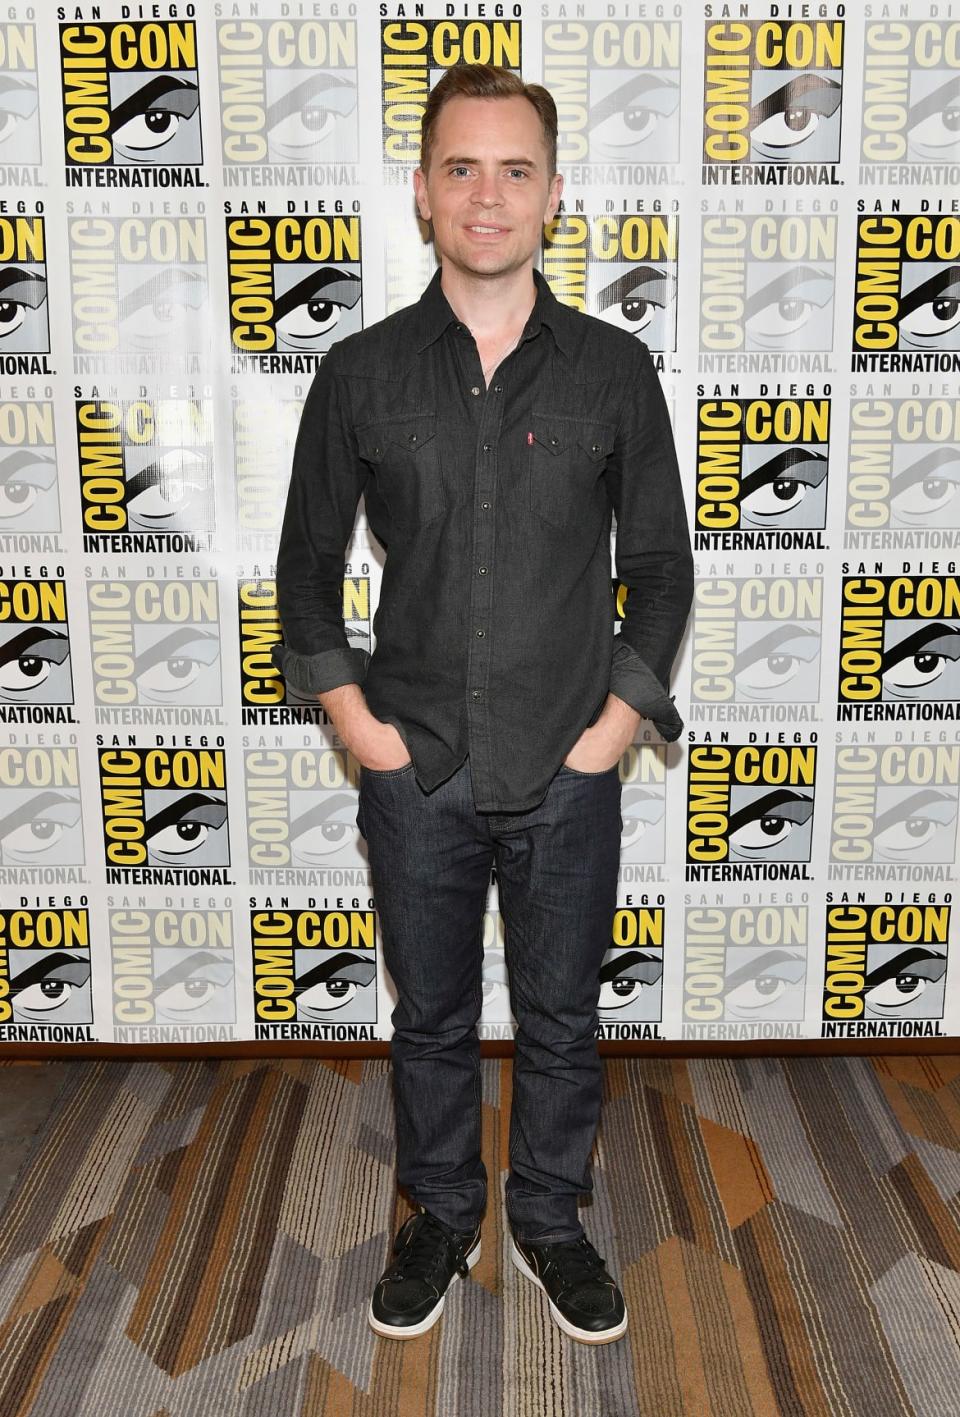 David Jenkins standing in front of a stand and repeat at Comic Con